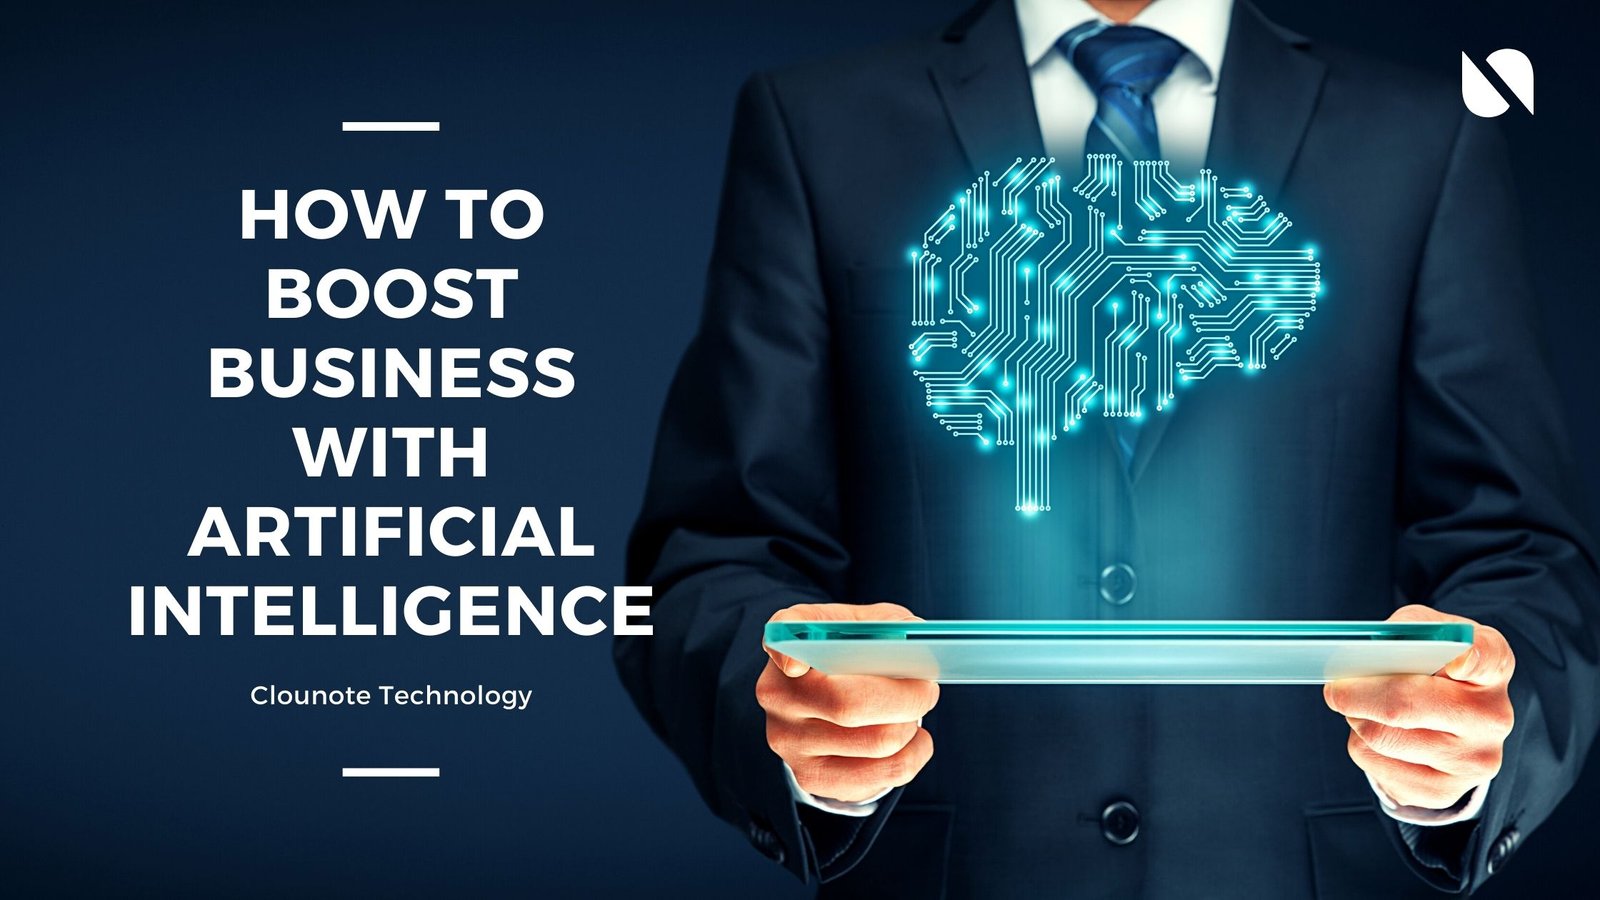 How to boost business with artificial intelligence